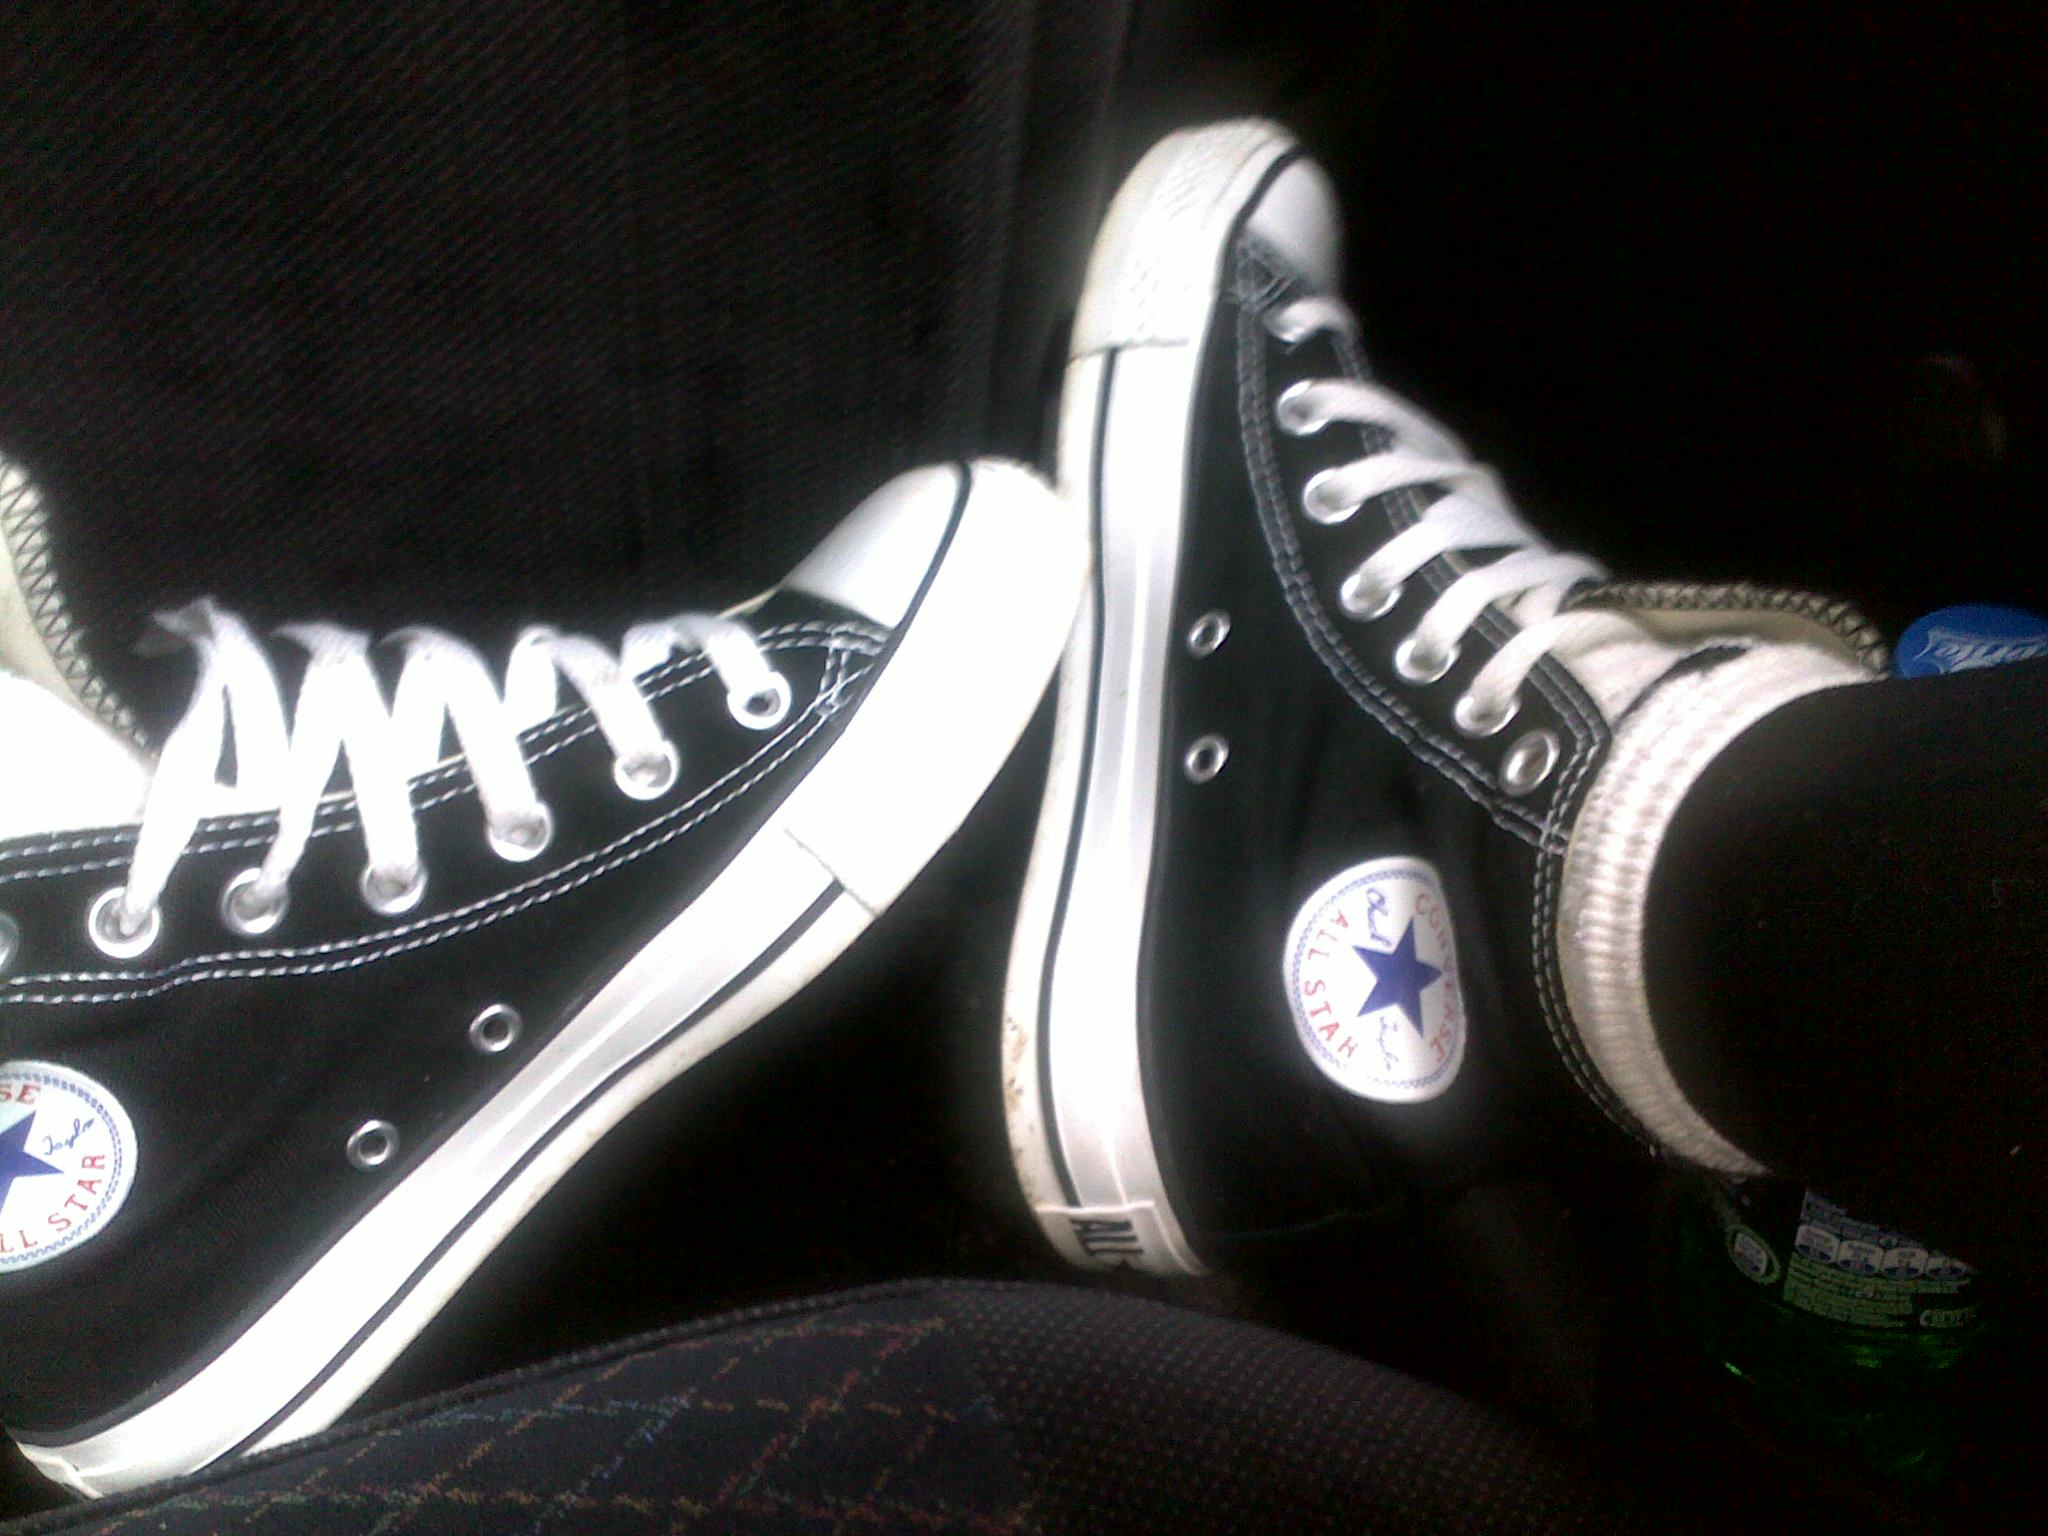 My lovely shoes!♥.